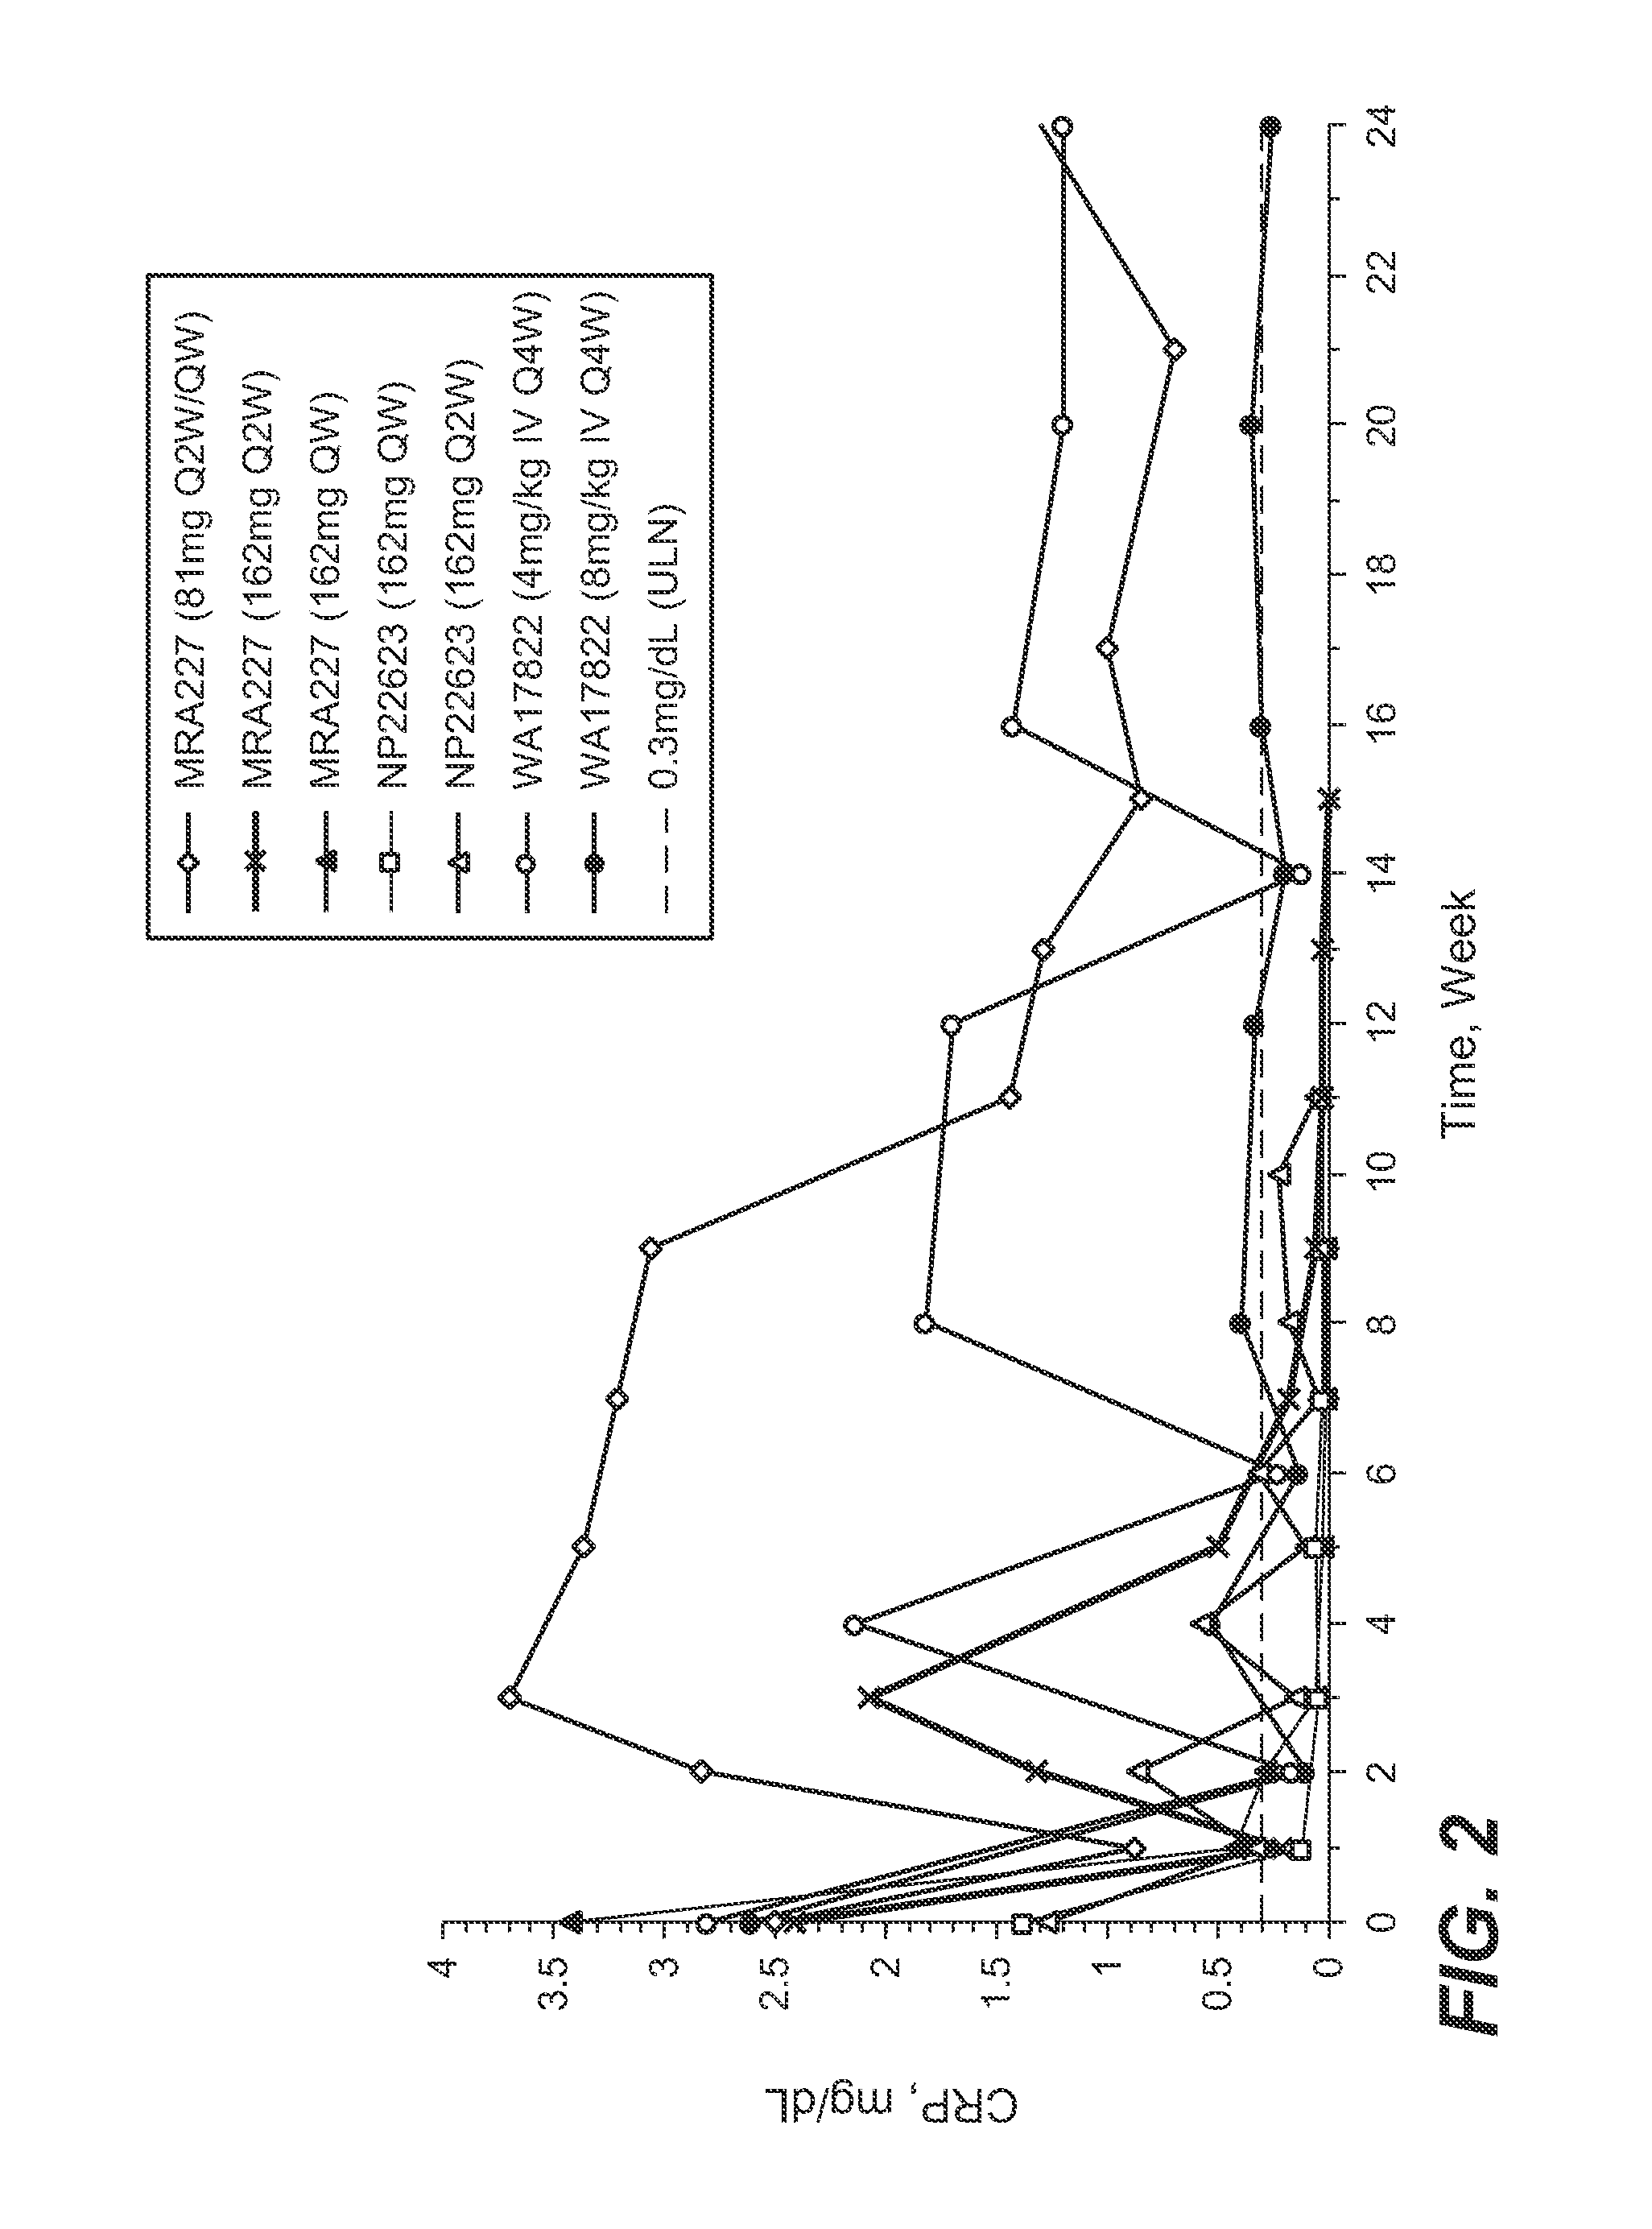 Subcutaneously administered Anti-il-6 receptor antibody